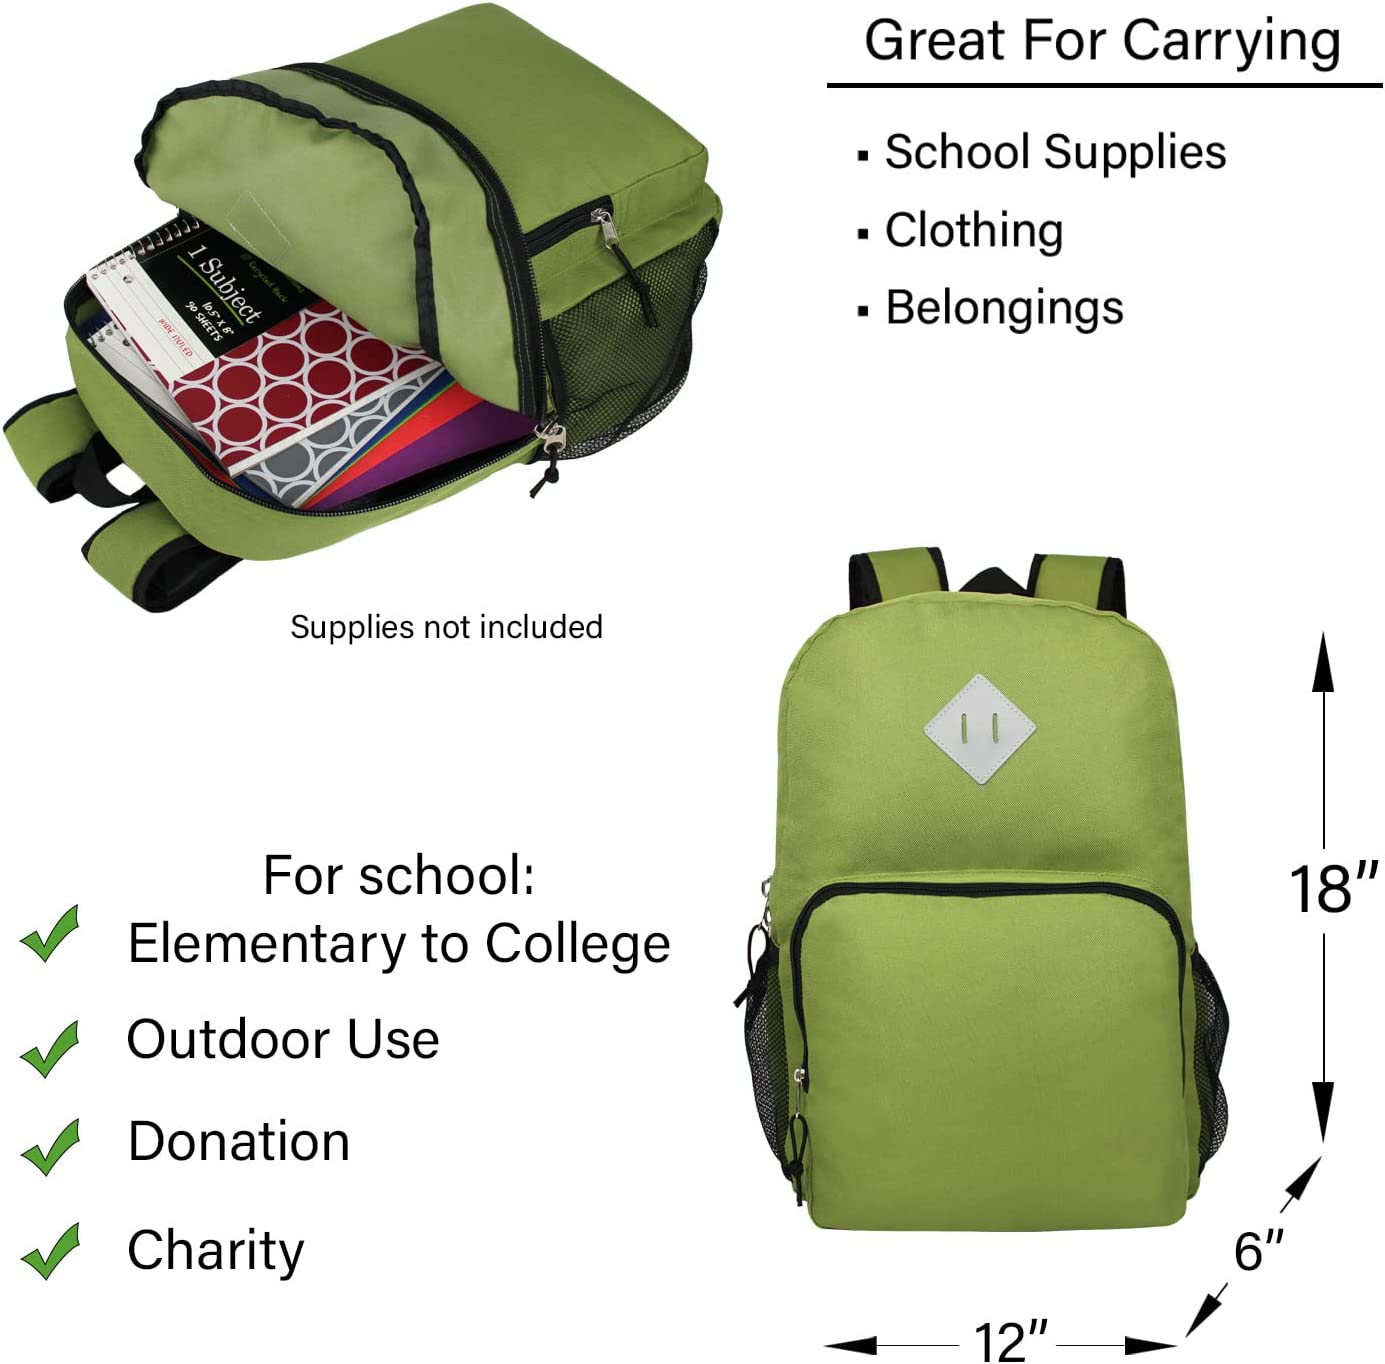 18 Piece Wholesale Deluxe School Supply Kit With 17" Backpack - Bulk Case of 12 Backpacks and Kits